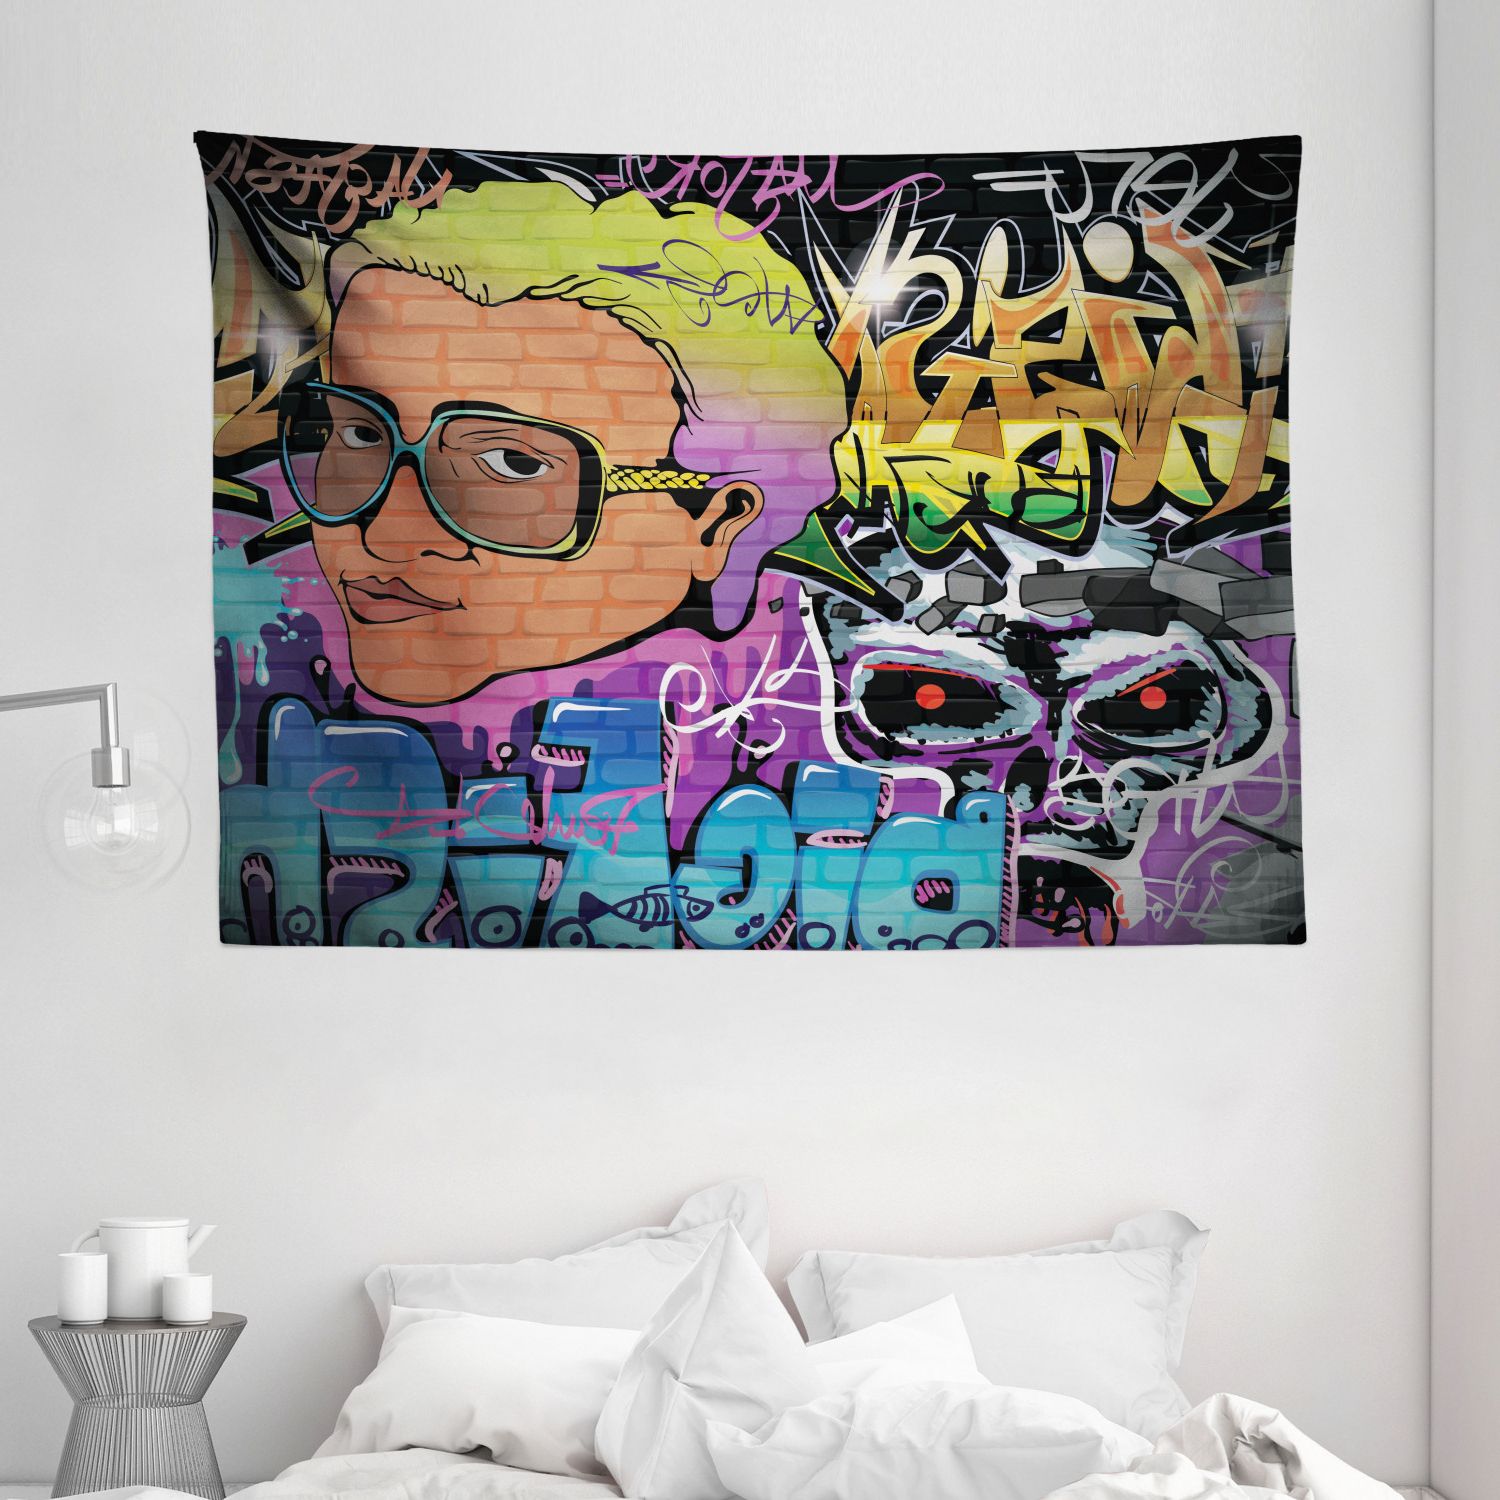 Most Up To Date Urban Graffiti Tapestry, Artistic Hip Hop Design Graffiti Wall Urban Art  Background Man Head Detail, Wall Hanging For Bedroom Living Room Dorm Decor,  80w X 60l Inches, Multicolor,ambesonne – Walmart For Hip Hop Design Wall Art (View 15 of 15)